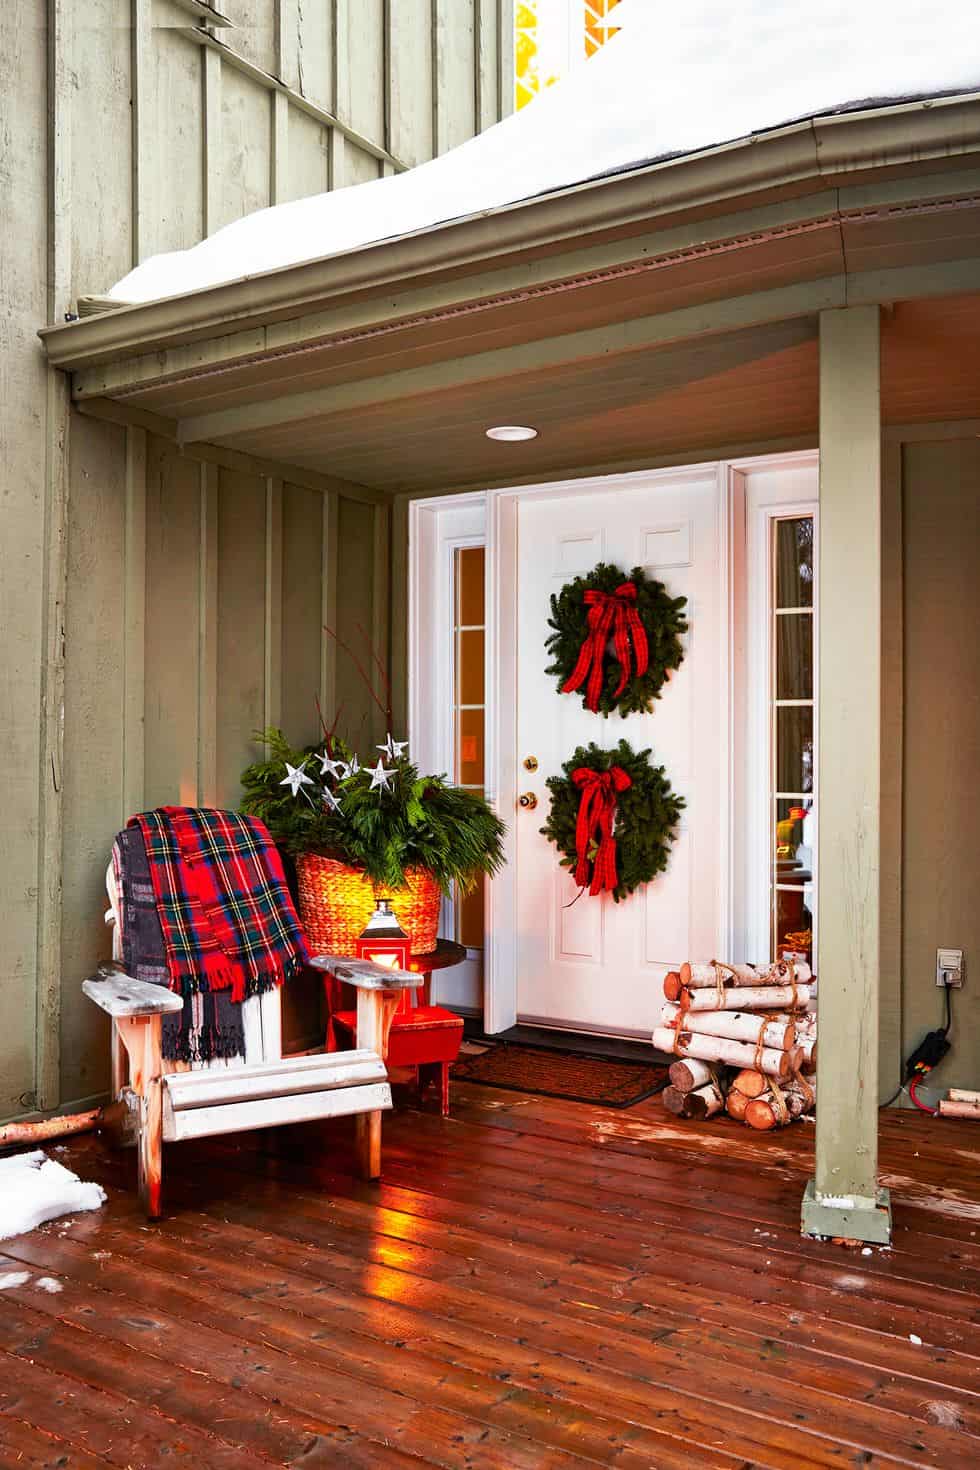 30+ Christmas Garden Ideas to Bring the Festive Spirit to Your Yard ...